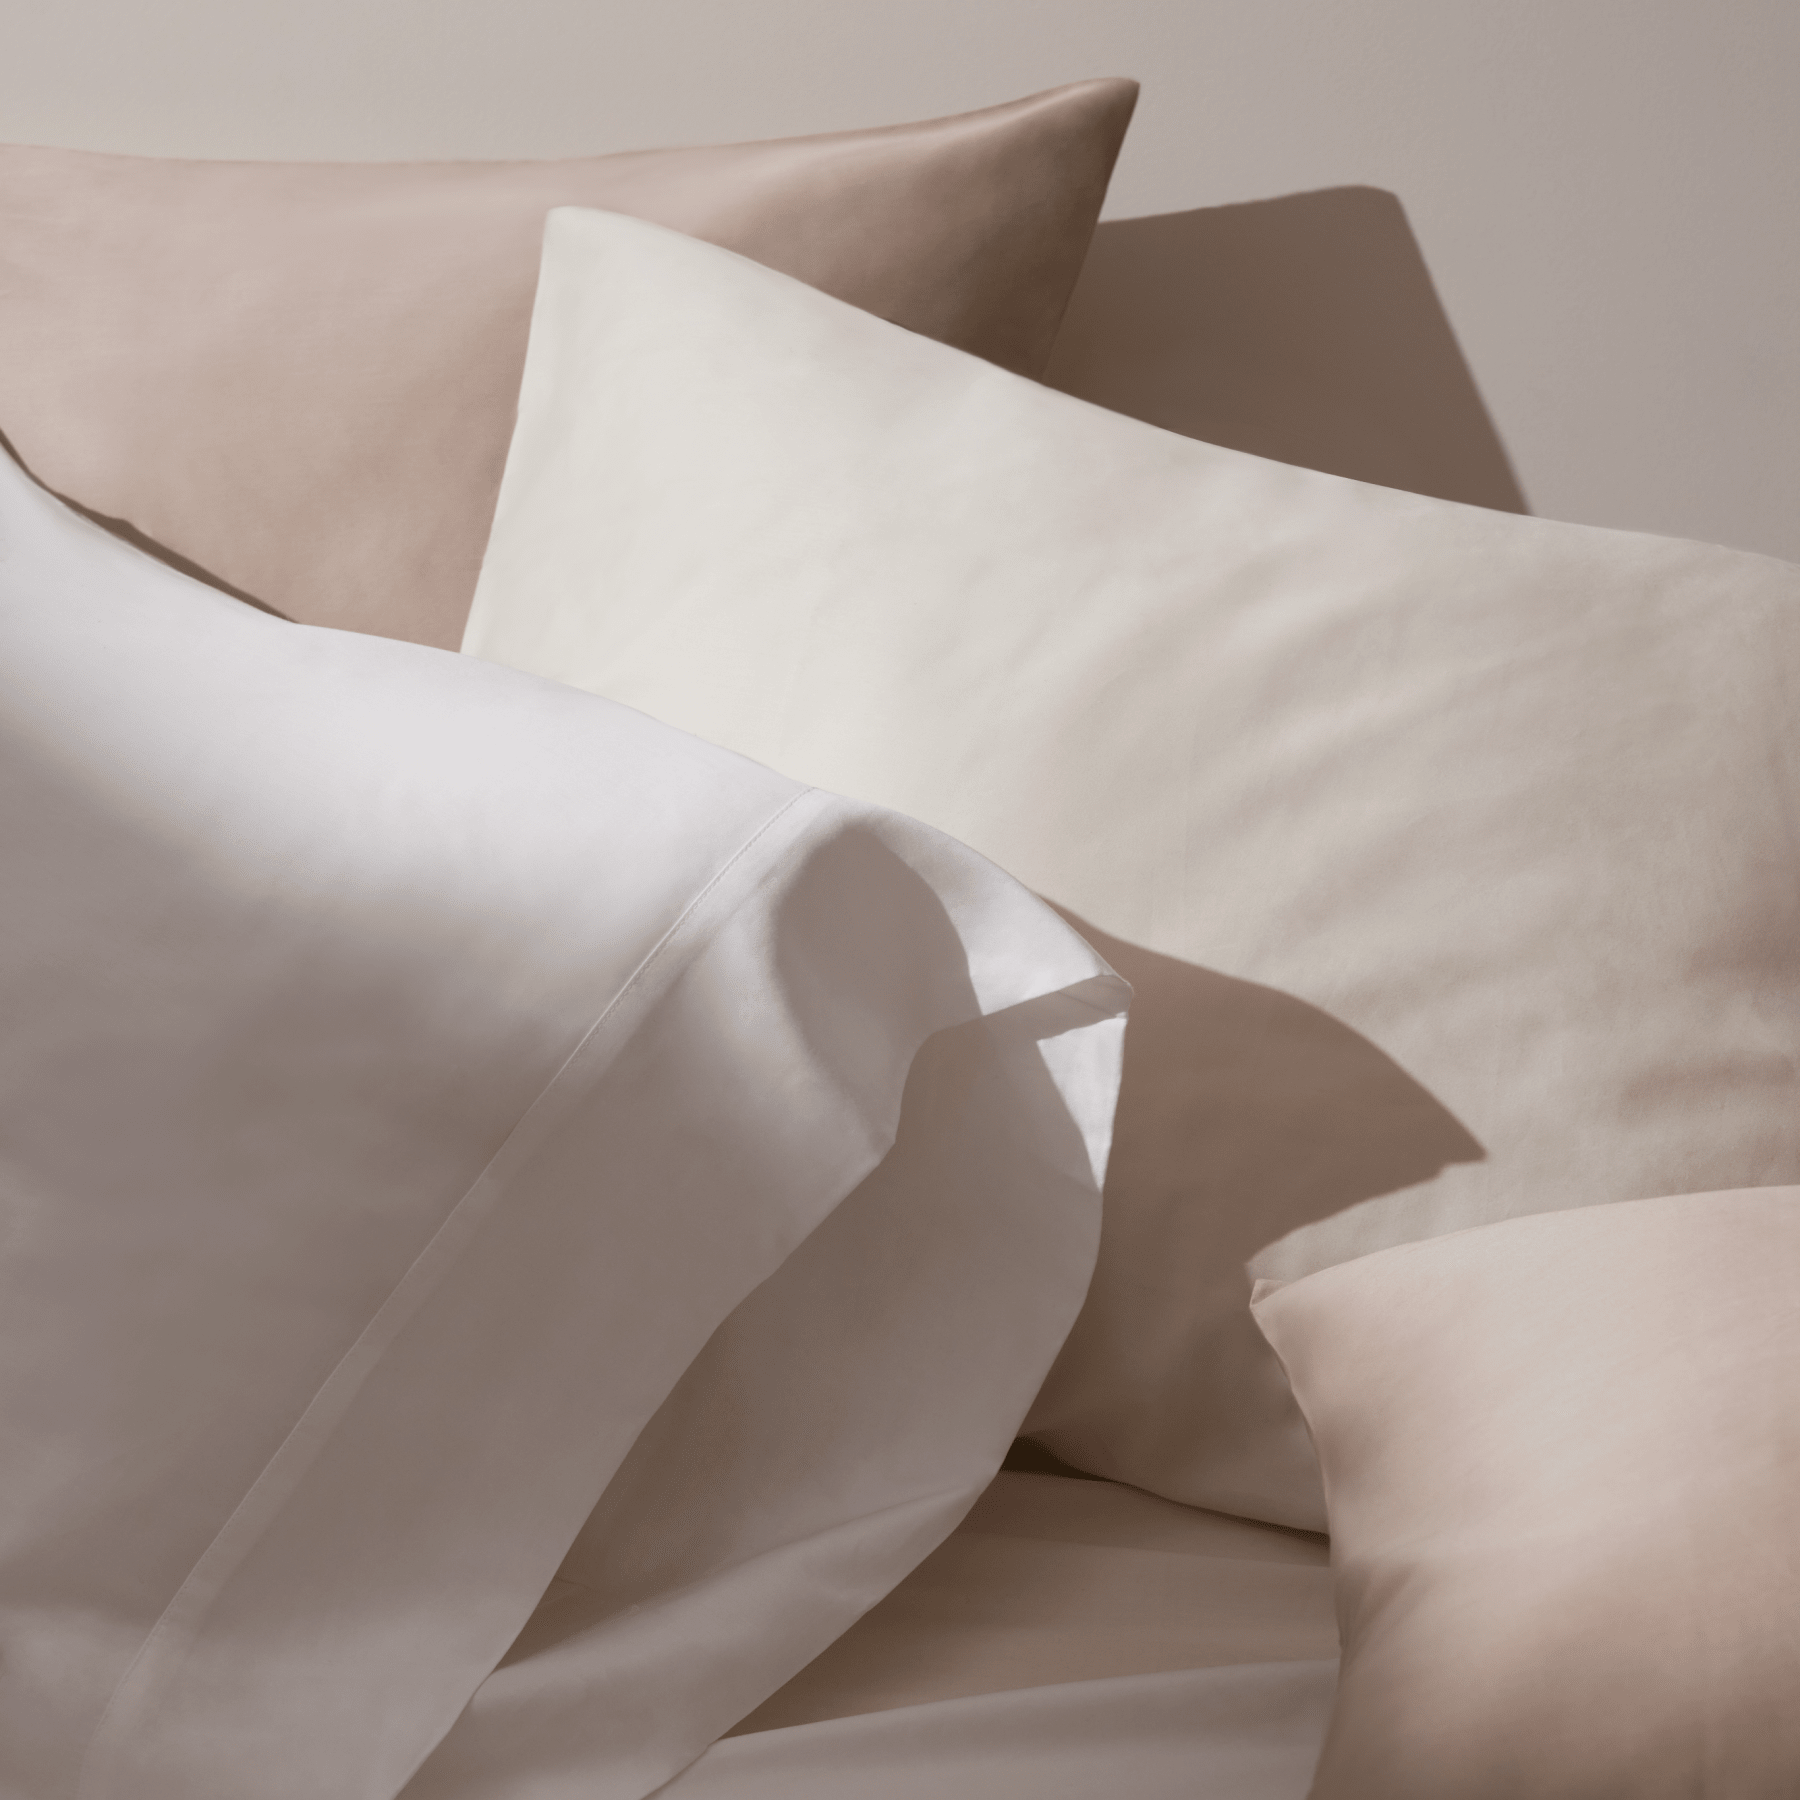 Sheets in white, sand, and beige